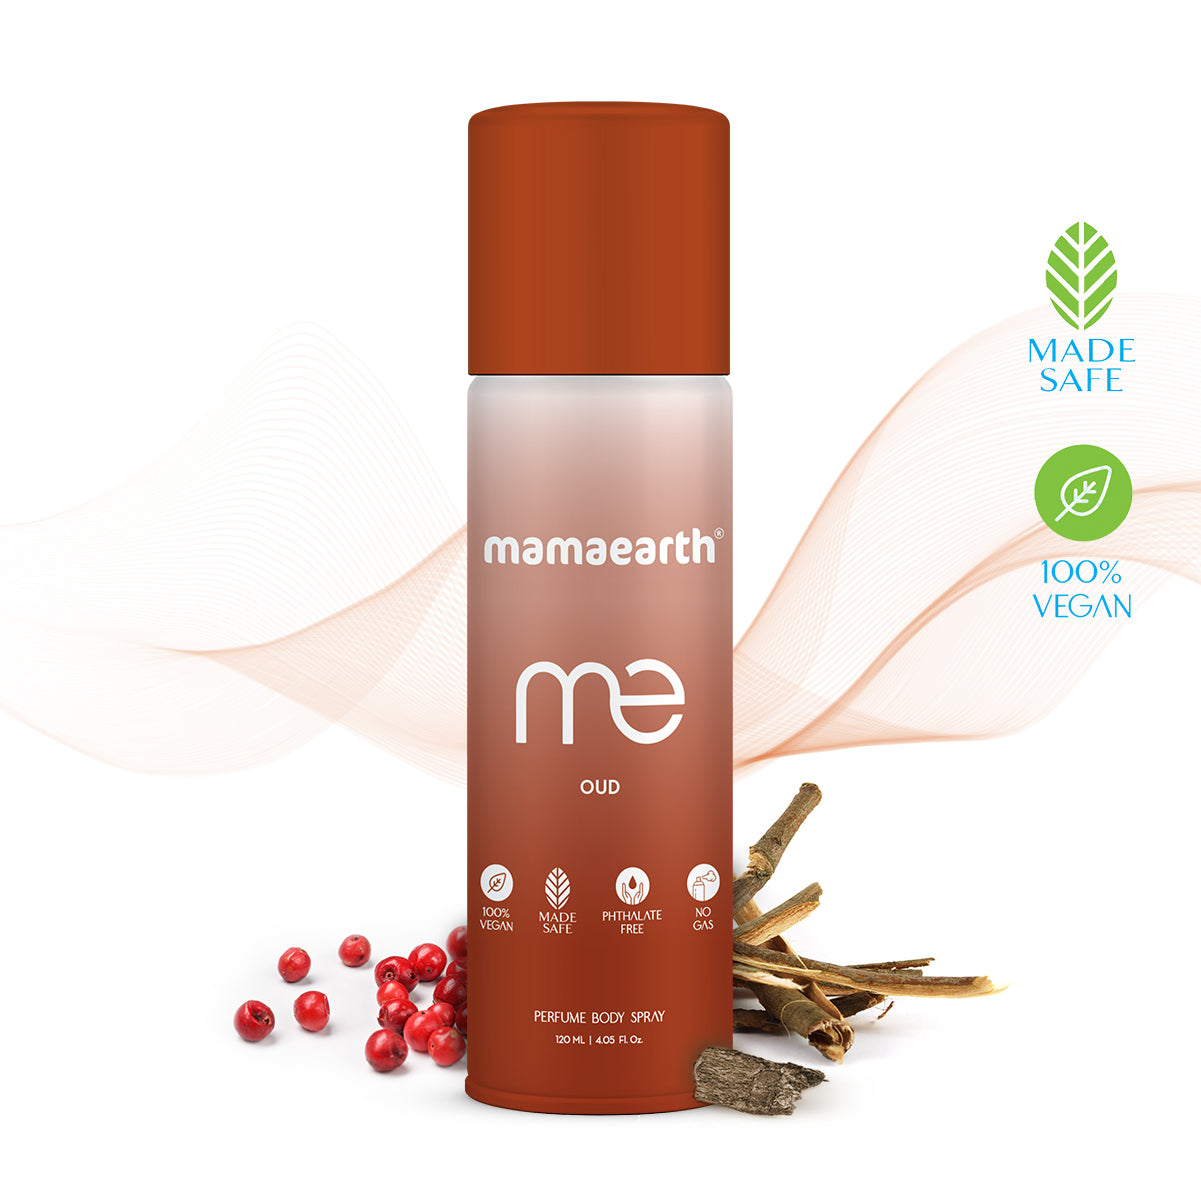 ME Oud Deodorant - 120 ml | Lasts up to 8 Hours | Made Safe Certified